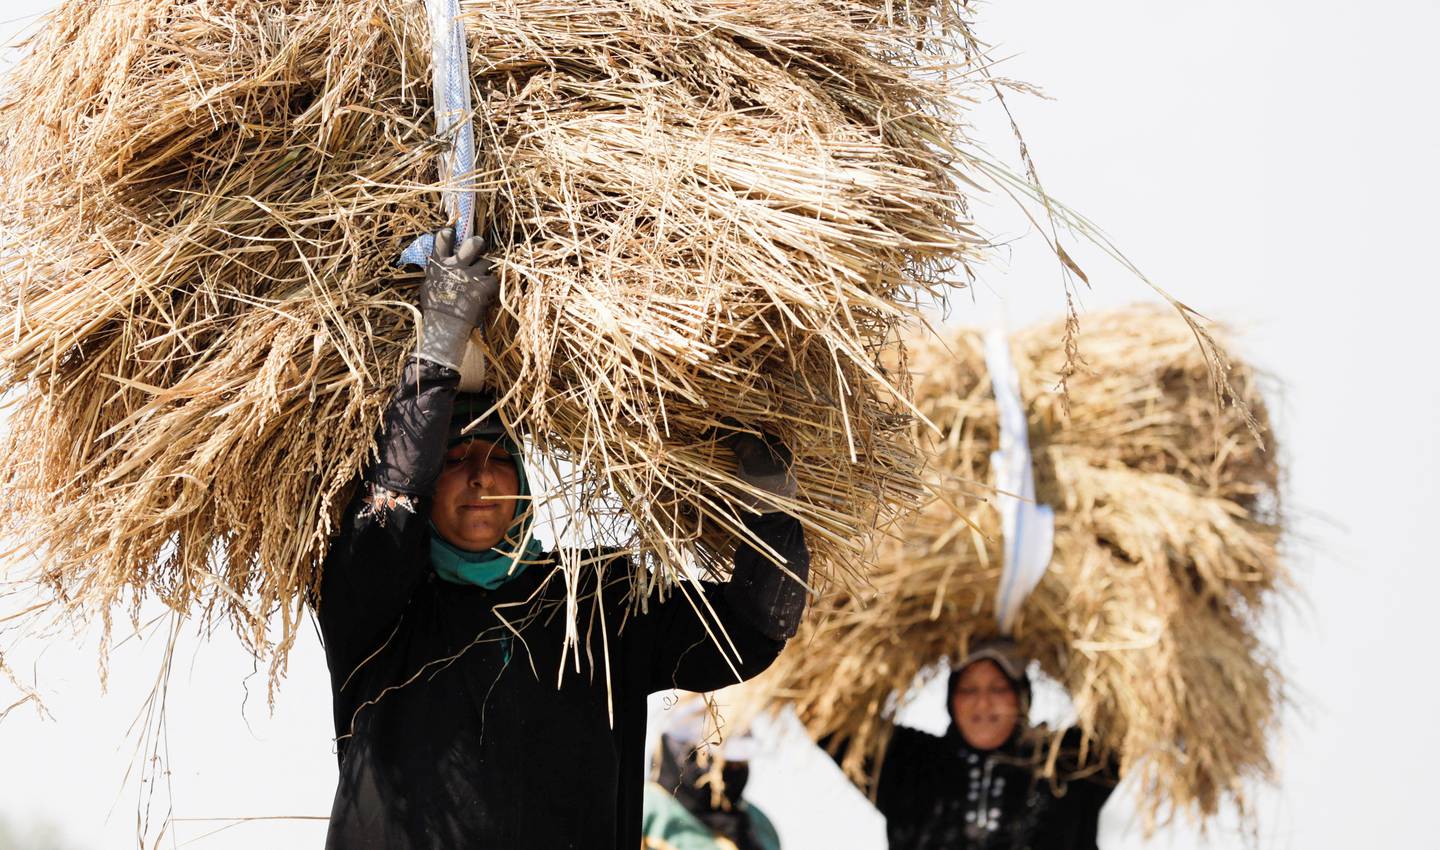 Farmers north of Cairo carry rice during a season marred by a lack of water and adverse weather. Reuters